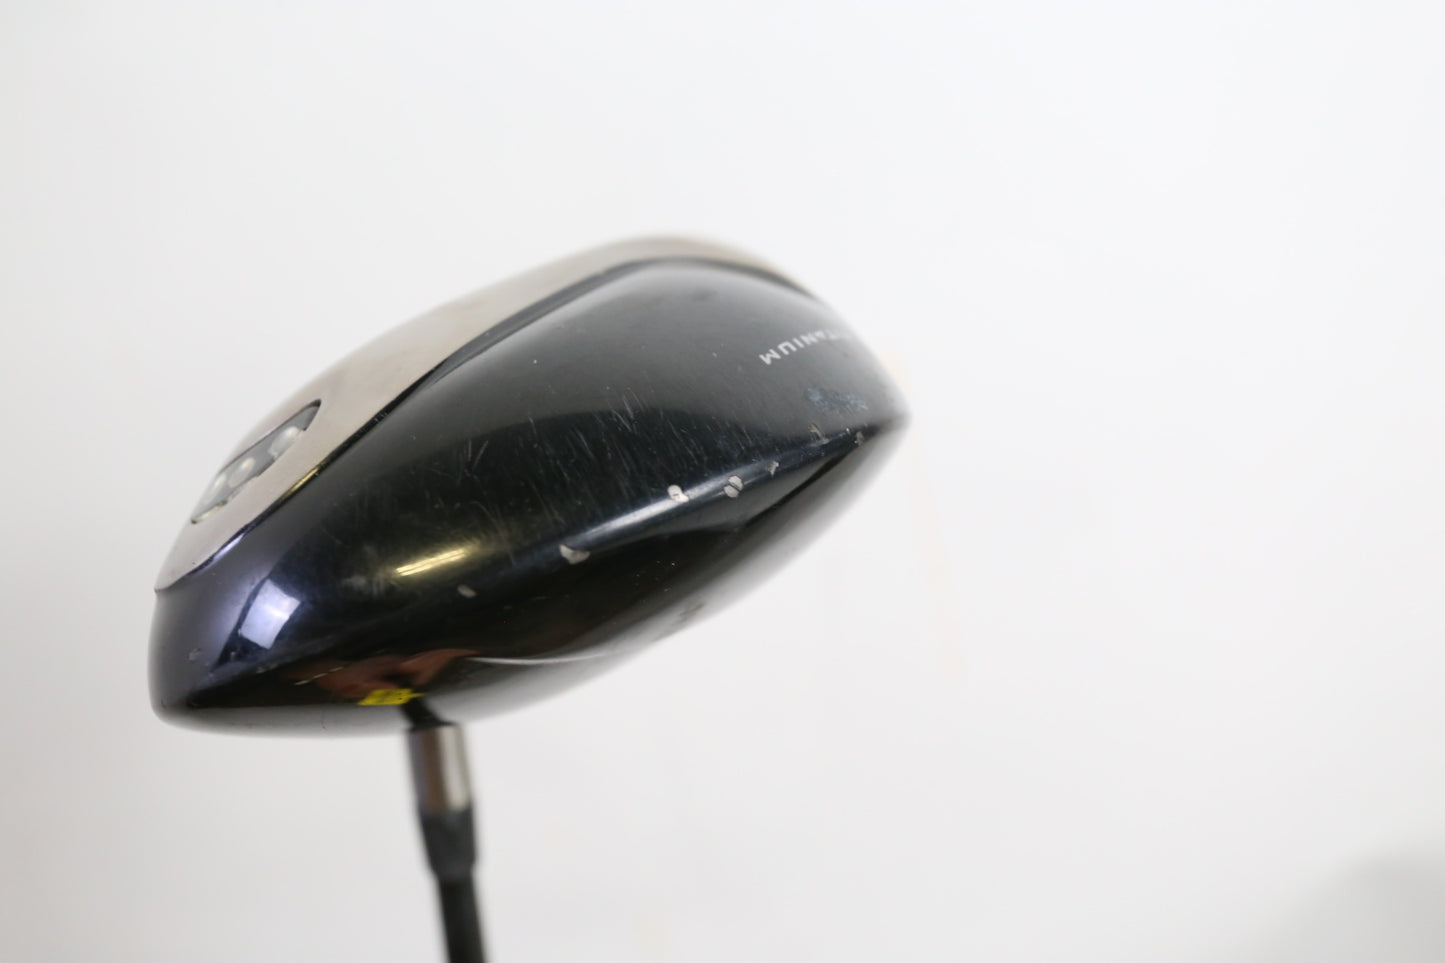 Used TaylorMade R580 Driver - Left-Handed - 9.5 Degrees - Stiff Flex-Next Round